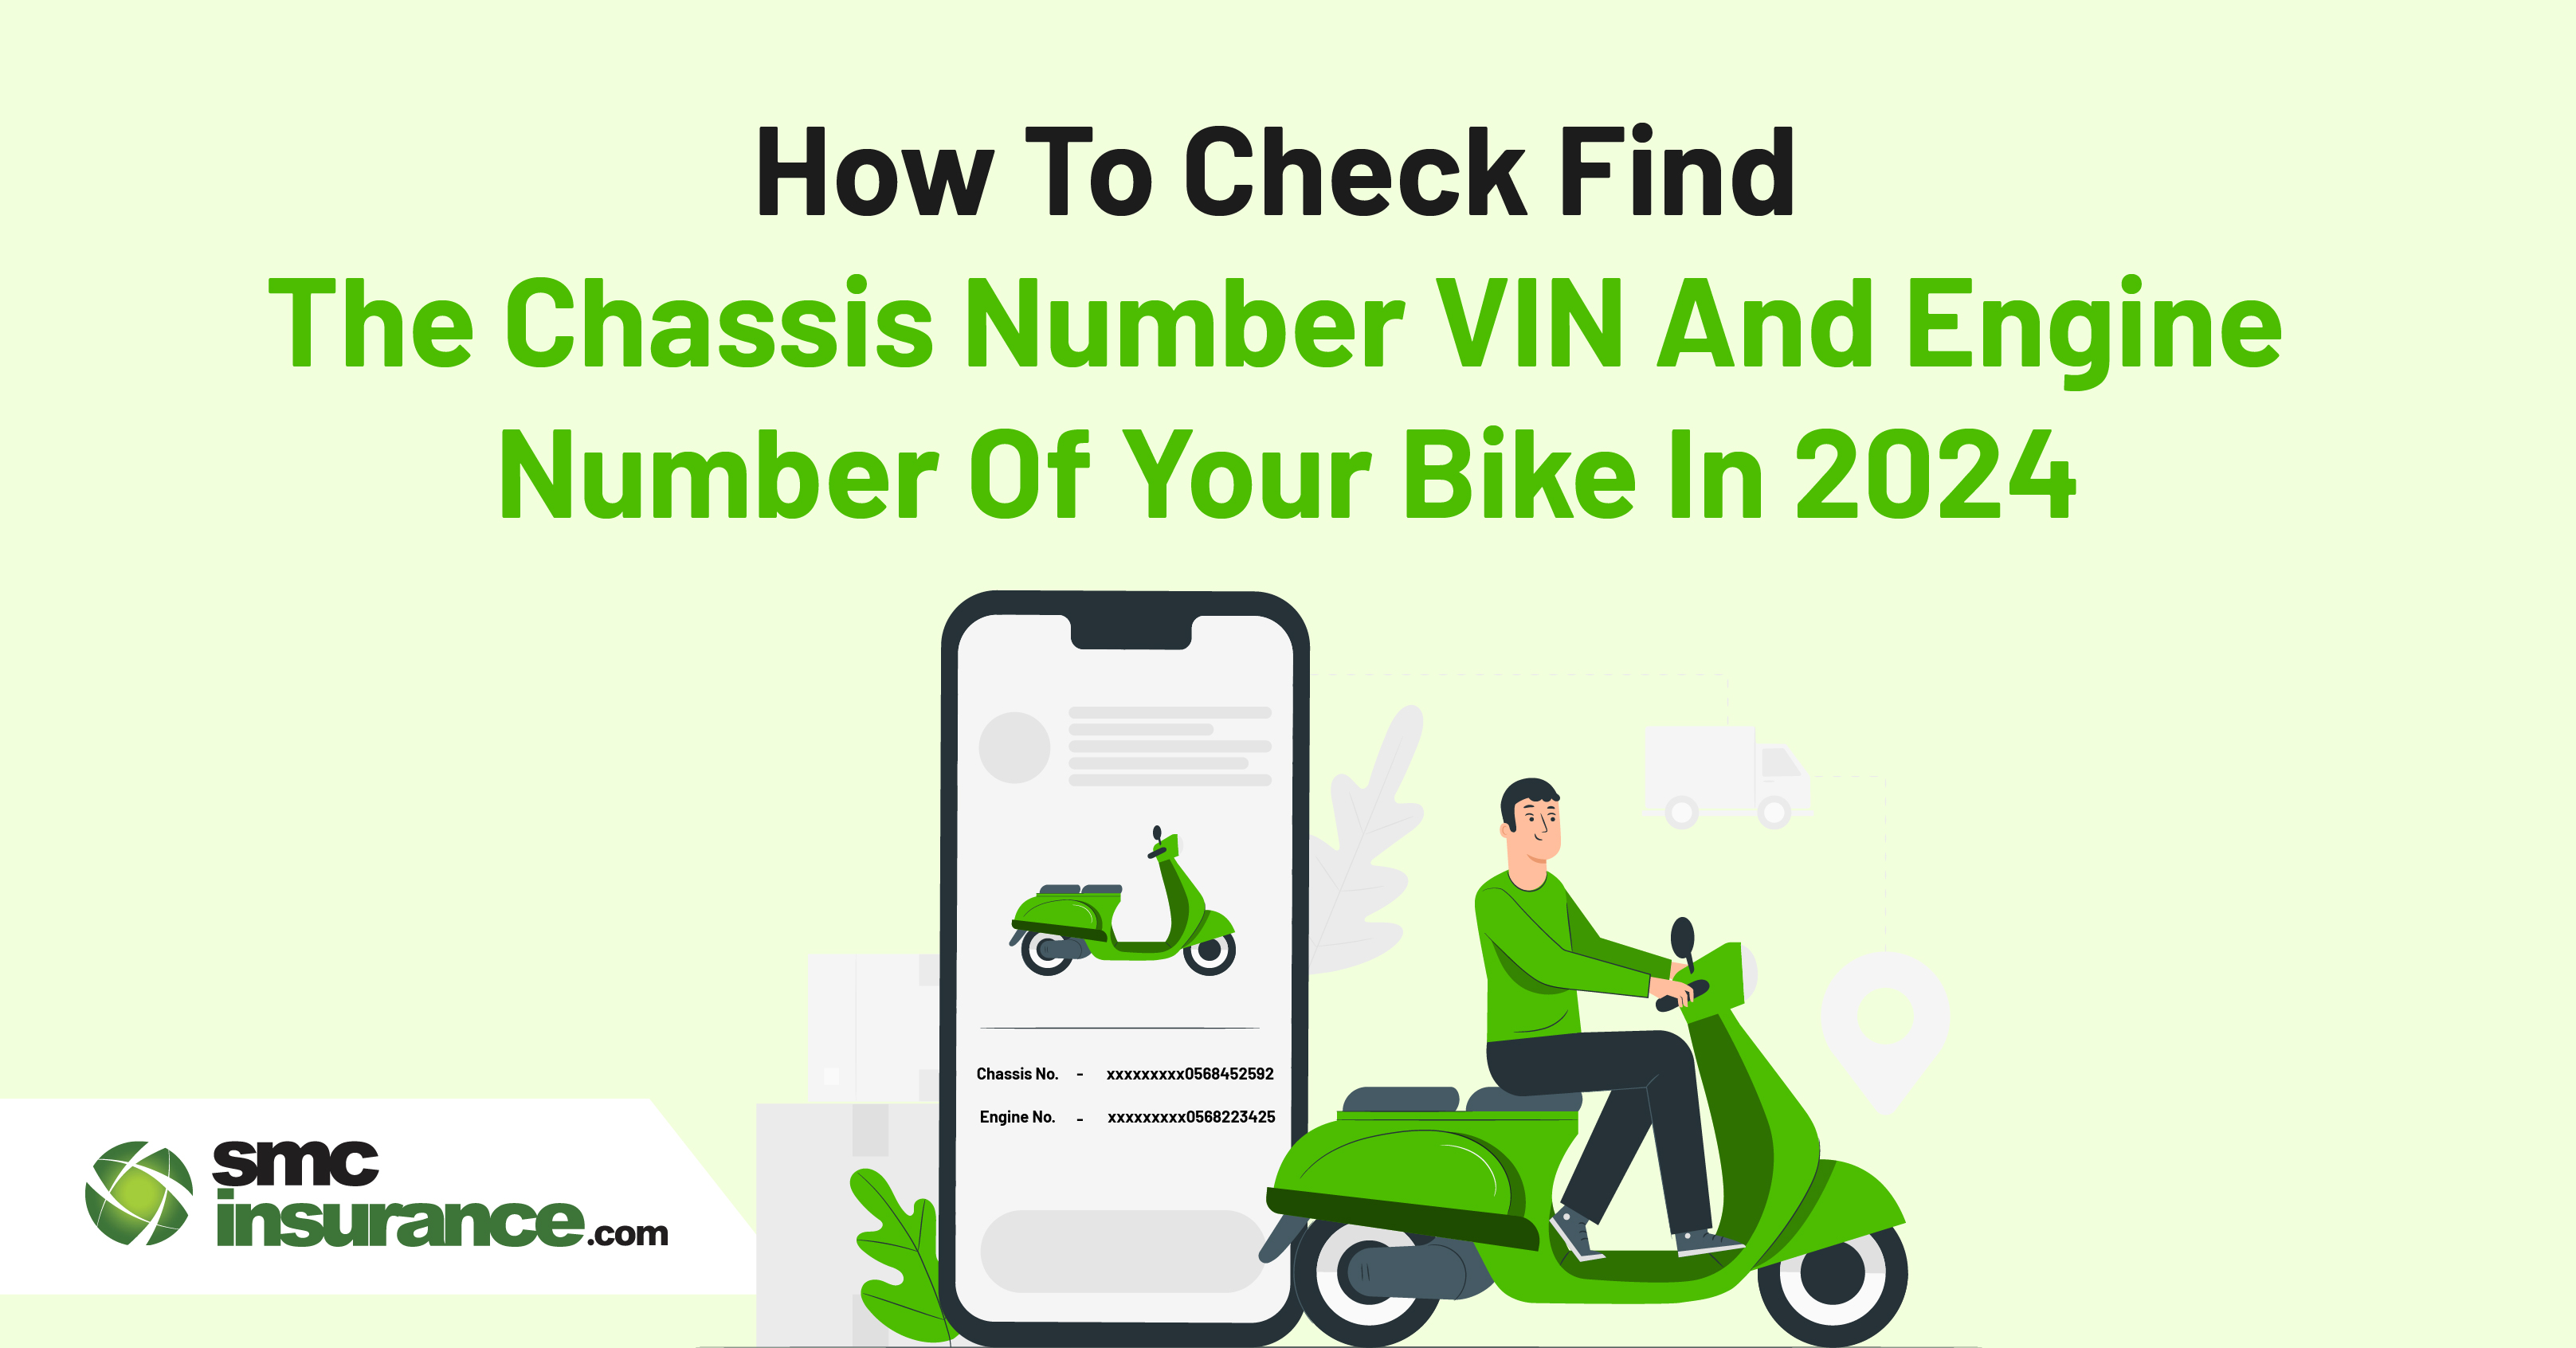 How To Check/Find The Chassis Number, VIN  And Engine Number Of Your Bike In 2024?